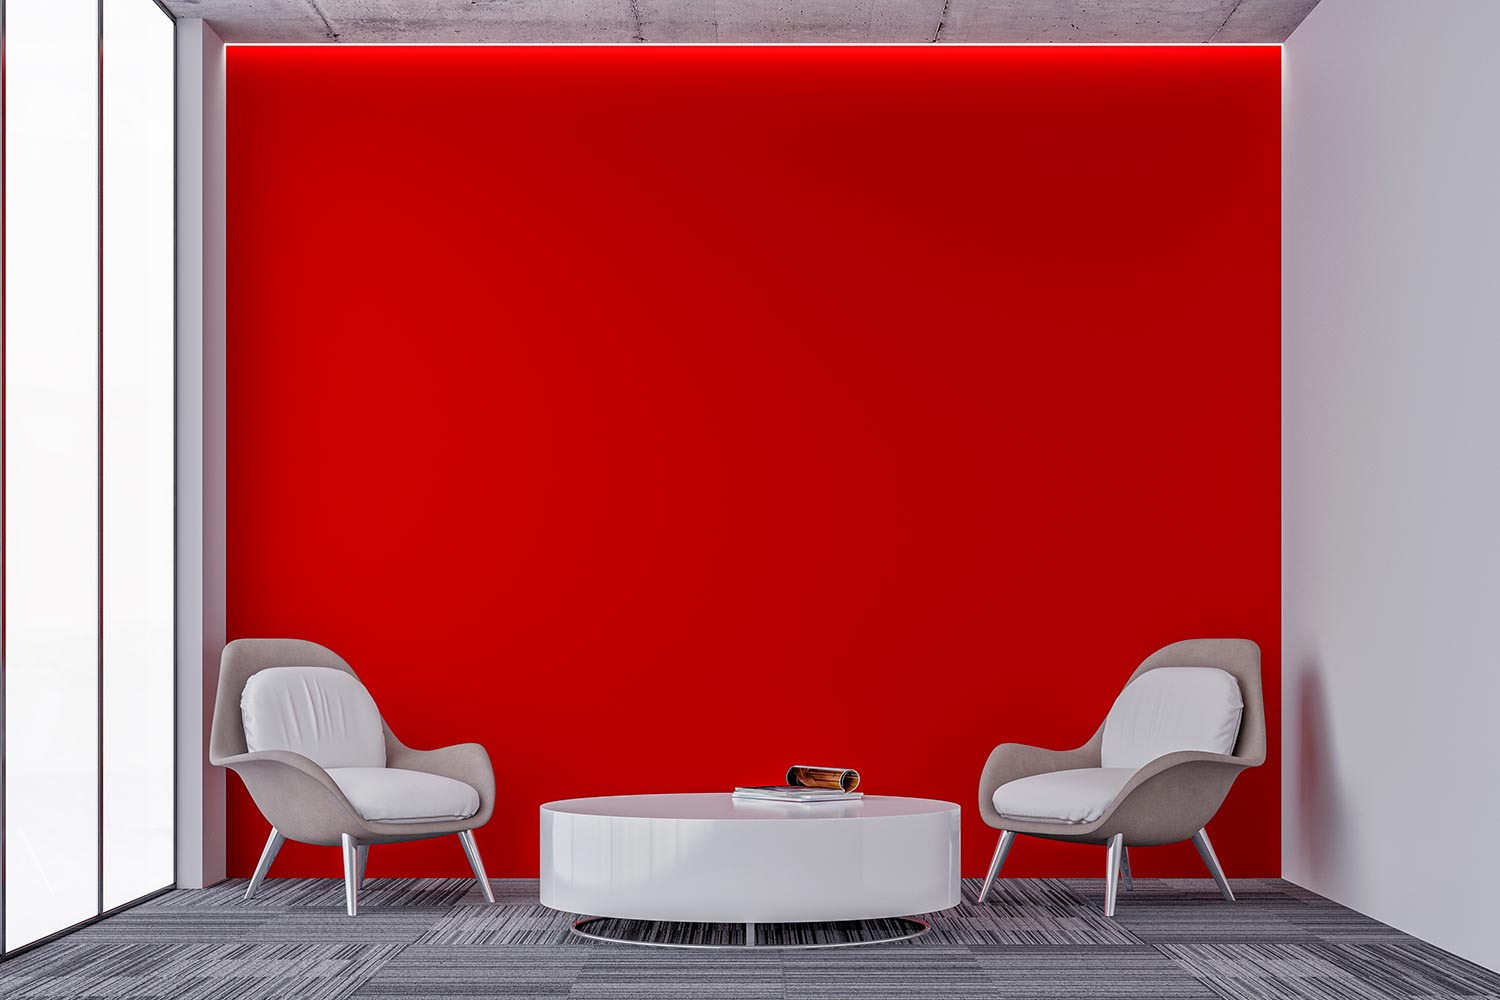 Round white glossy table and two comfort chairs in front of a large illuminated empty red plaster wall